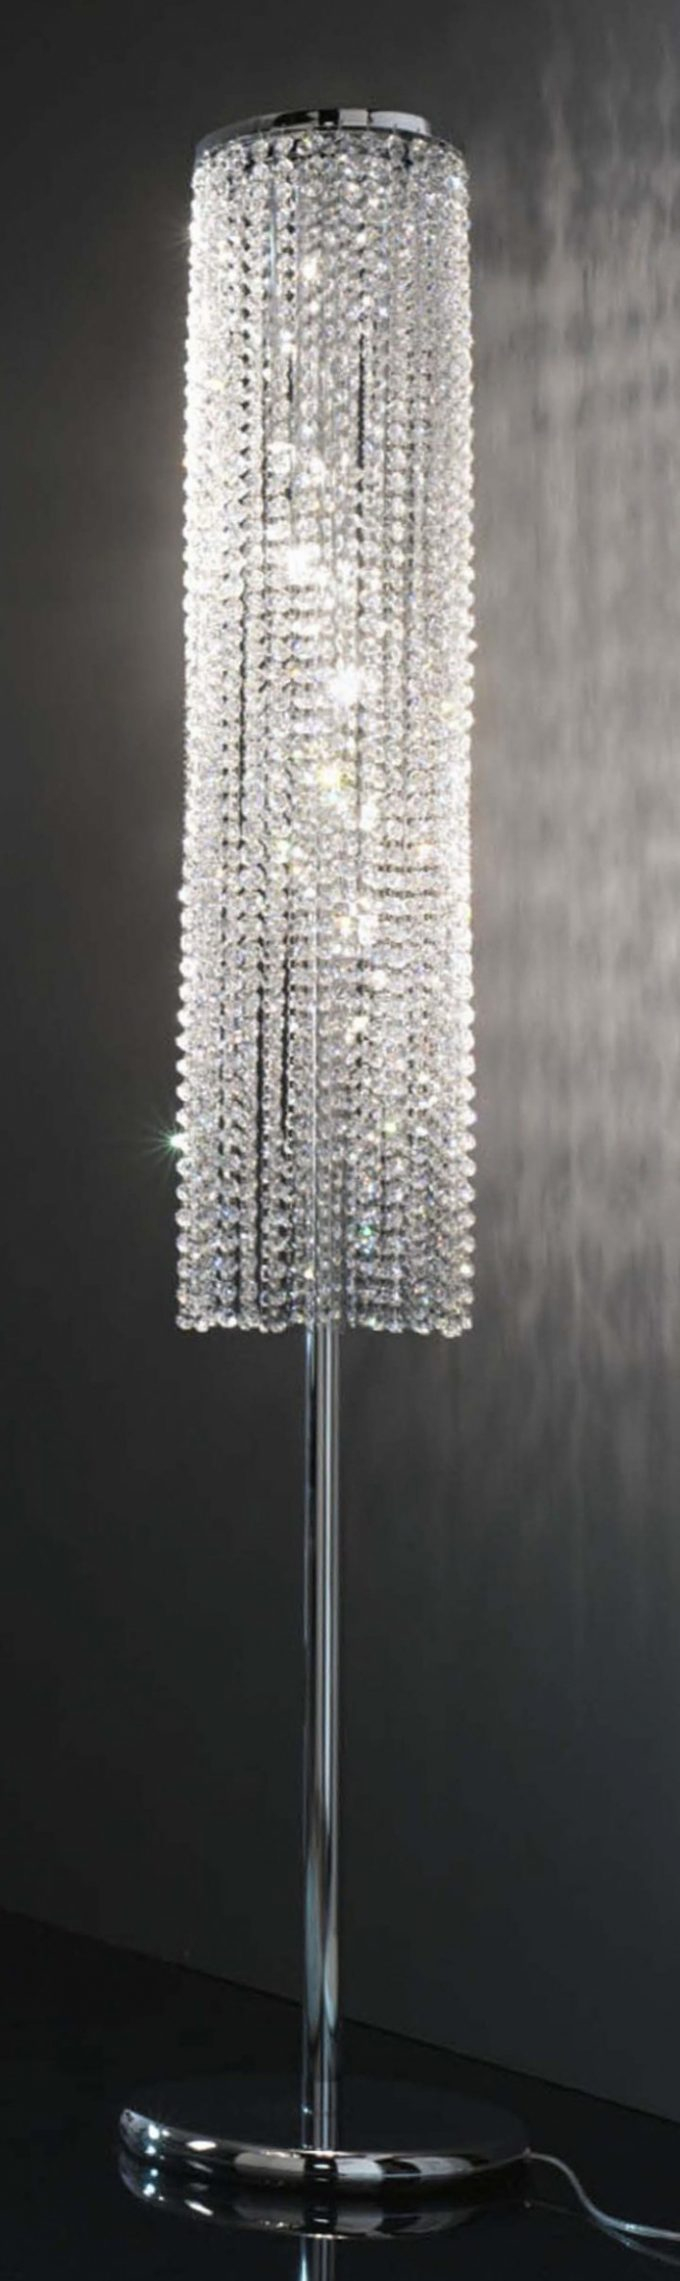 Tips Exciting Crystal Chandelier Floor Lamp Your House for dimensions 680 X 2281